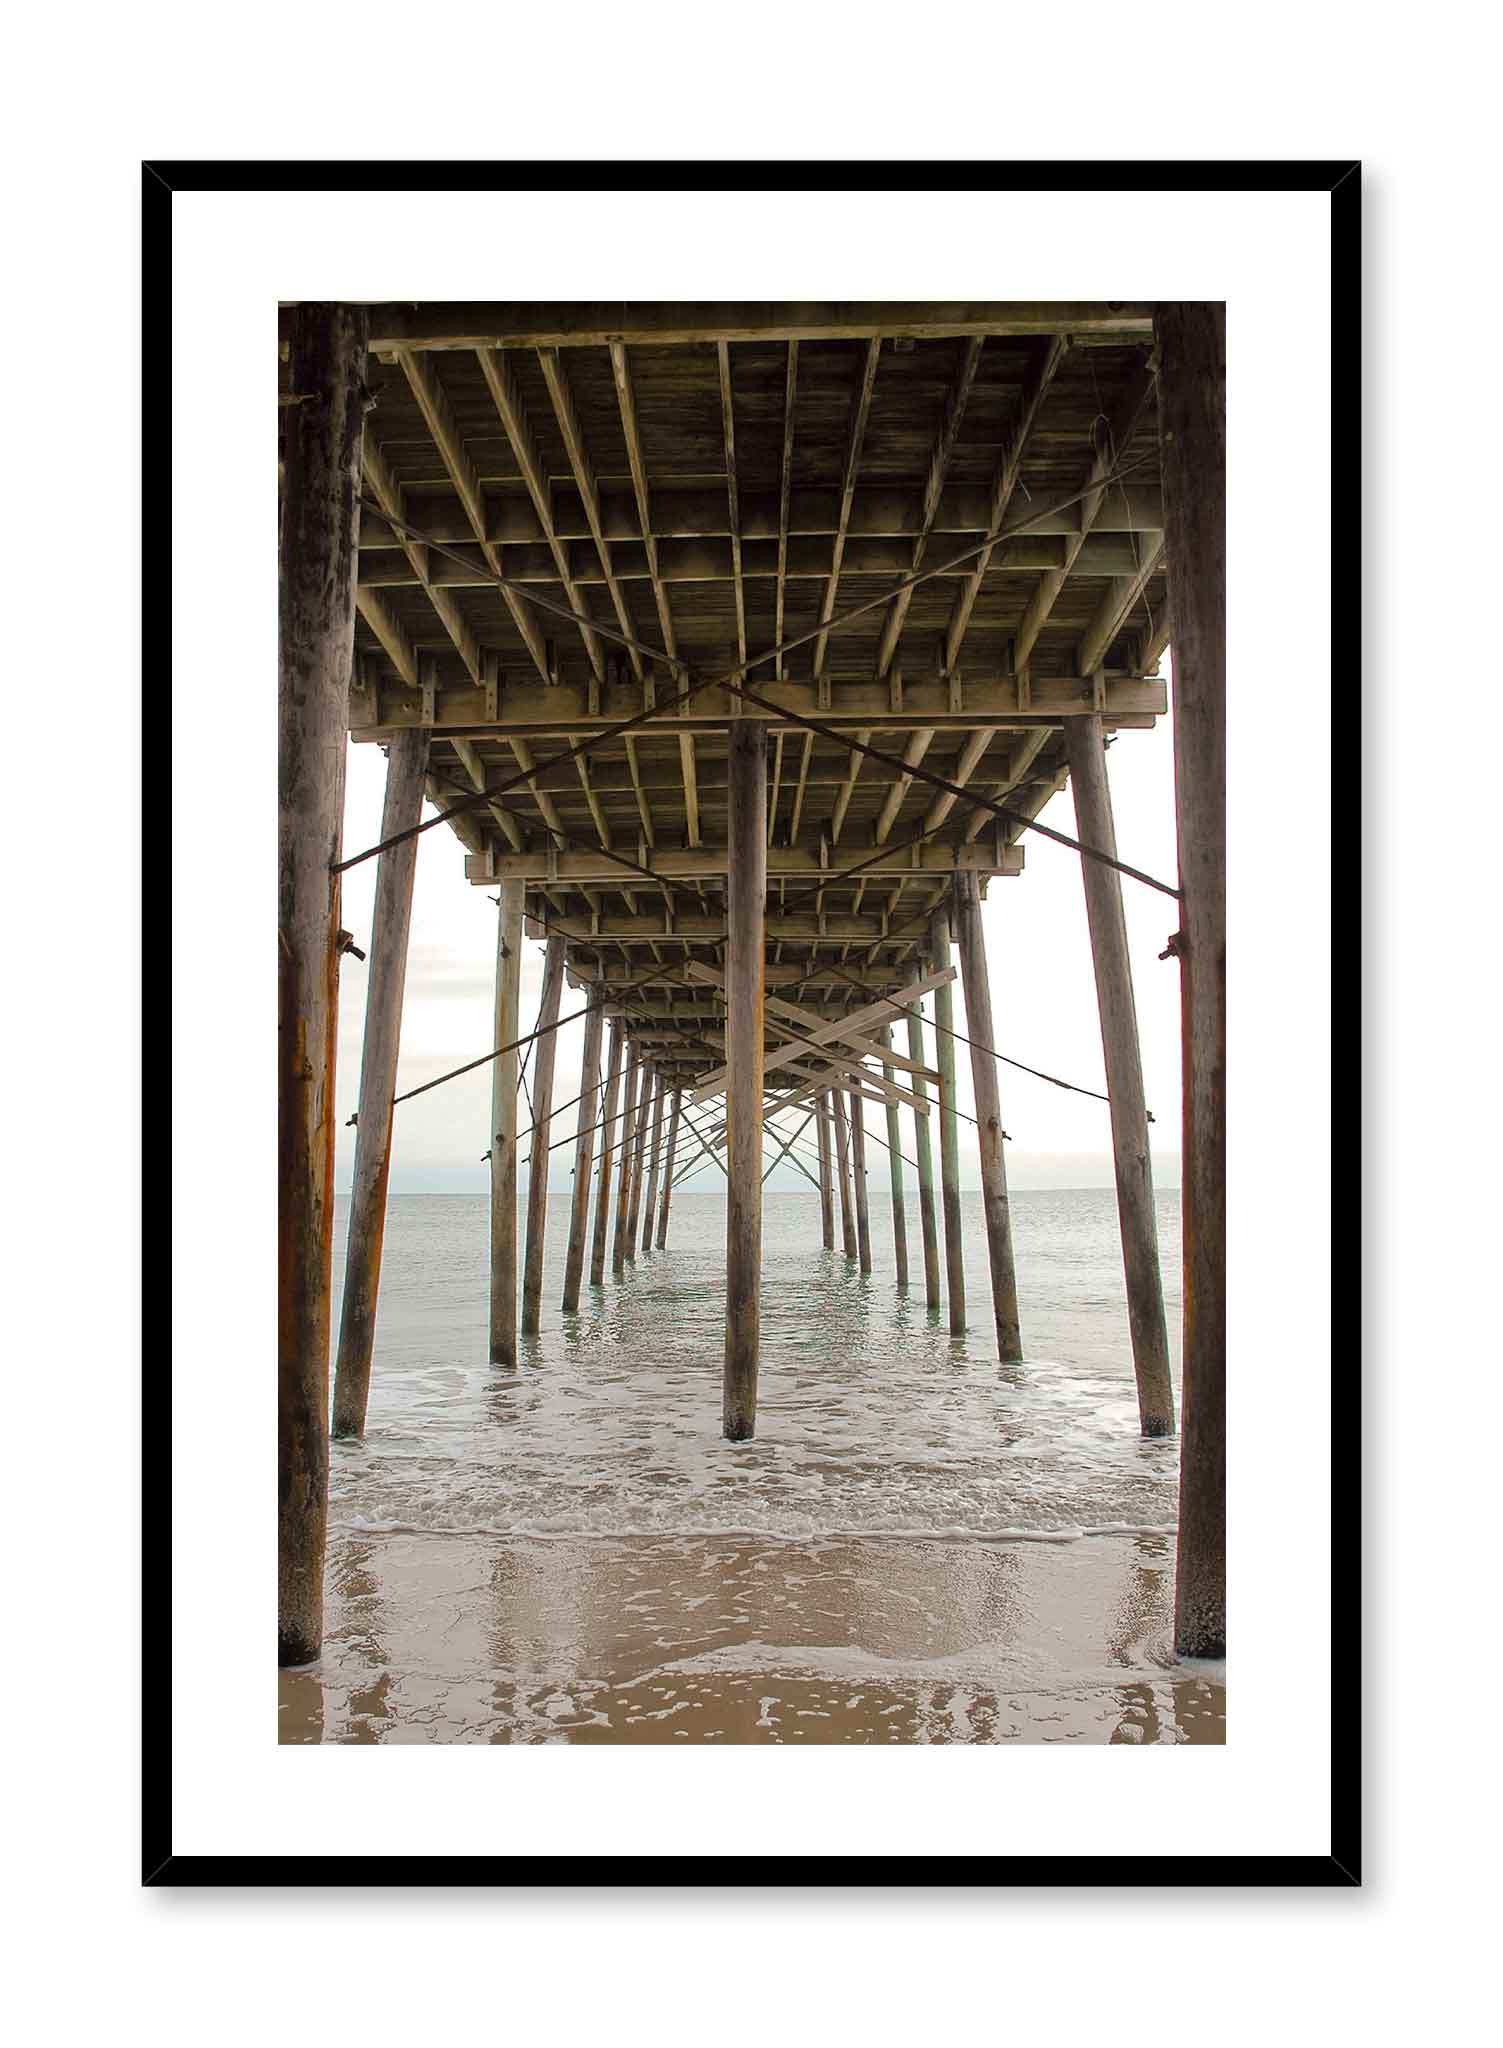 Beach House is a minimalist photography of an underview of a beach dock where waves are calmly flowing under by Opposite Wall.